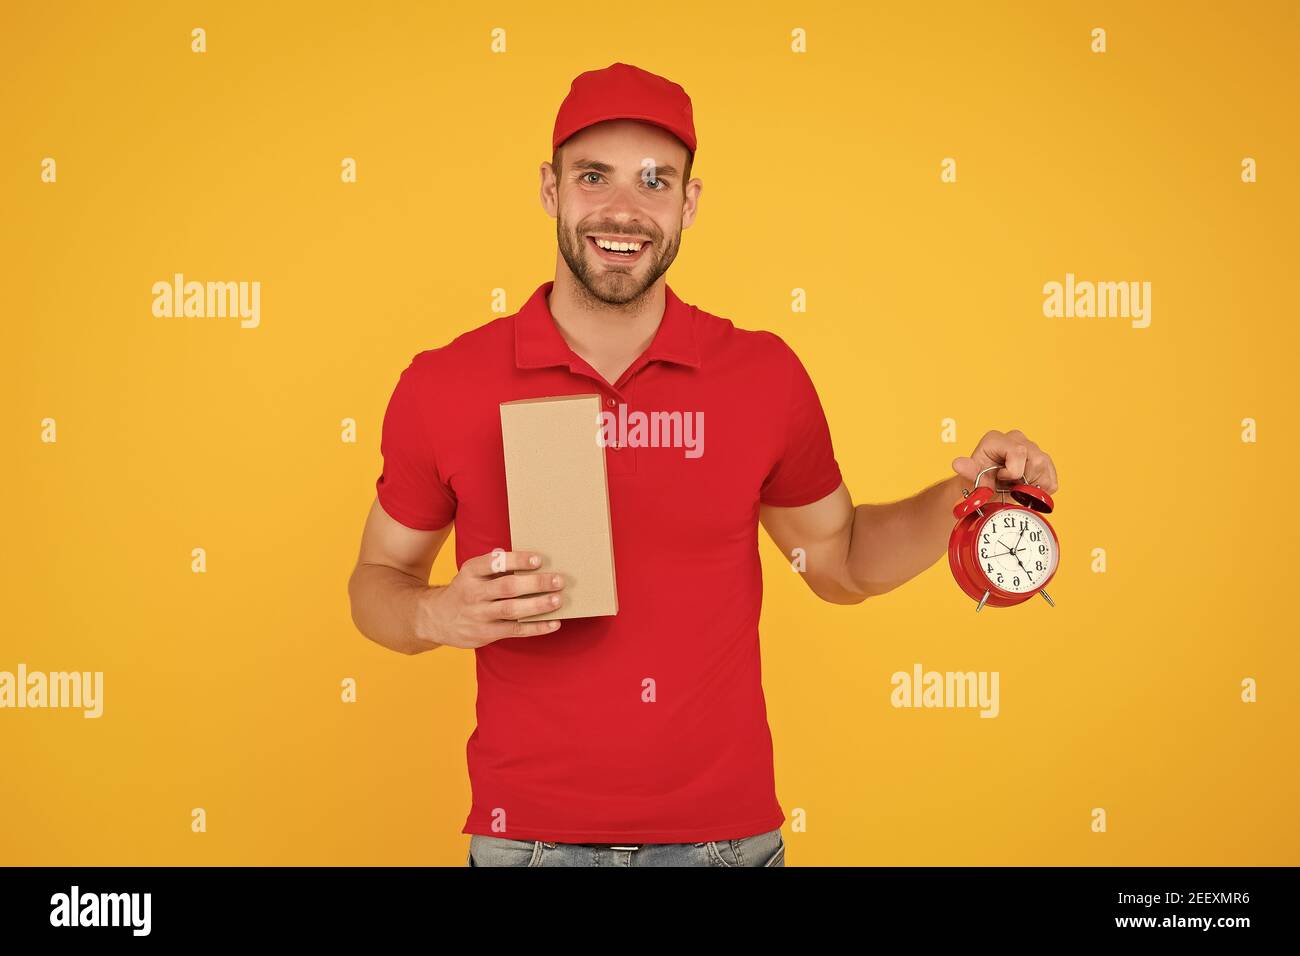 Real joy. go online shopping. Delivery during quarantine. friendly staff man. delivery time. Delivery Courier with time clock holding box. take your parcel. gift delivery man holding vintage clock. Stock Photo